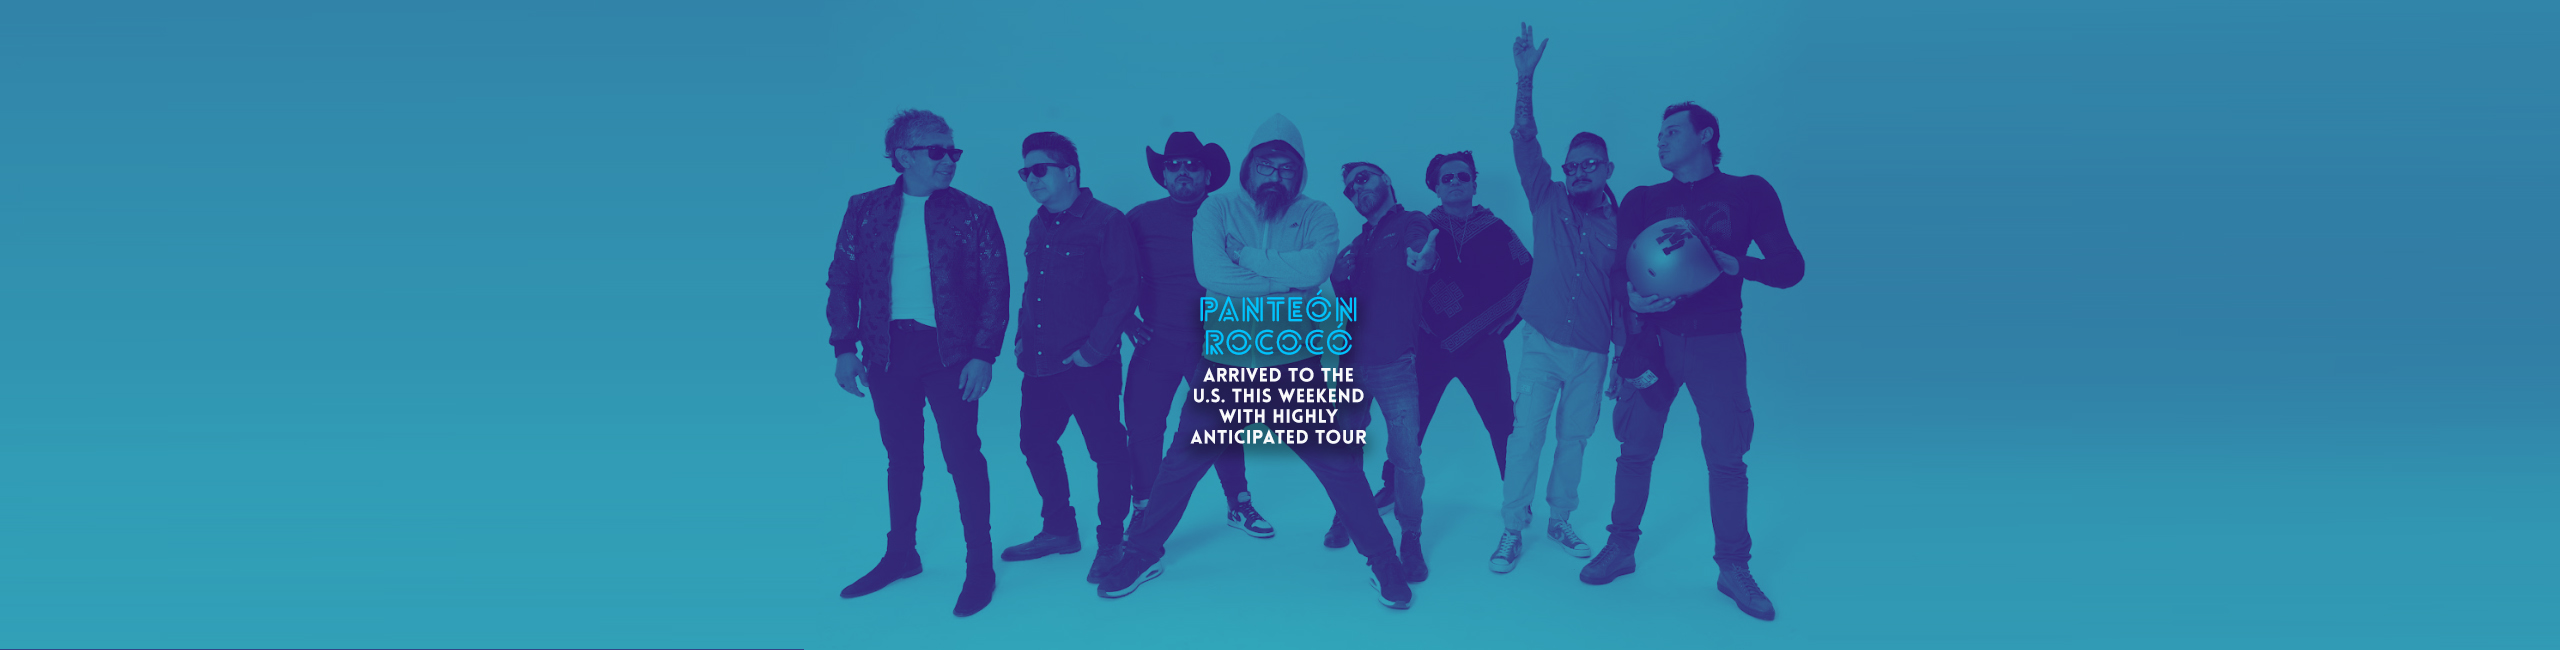 PANTEÓN ROCOCÓ arrived to the U.S this weekend with highly anticipated tour